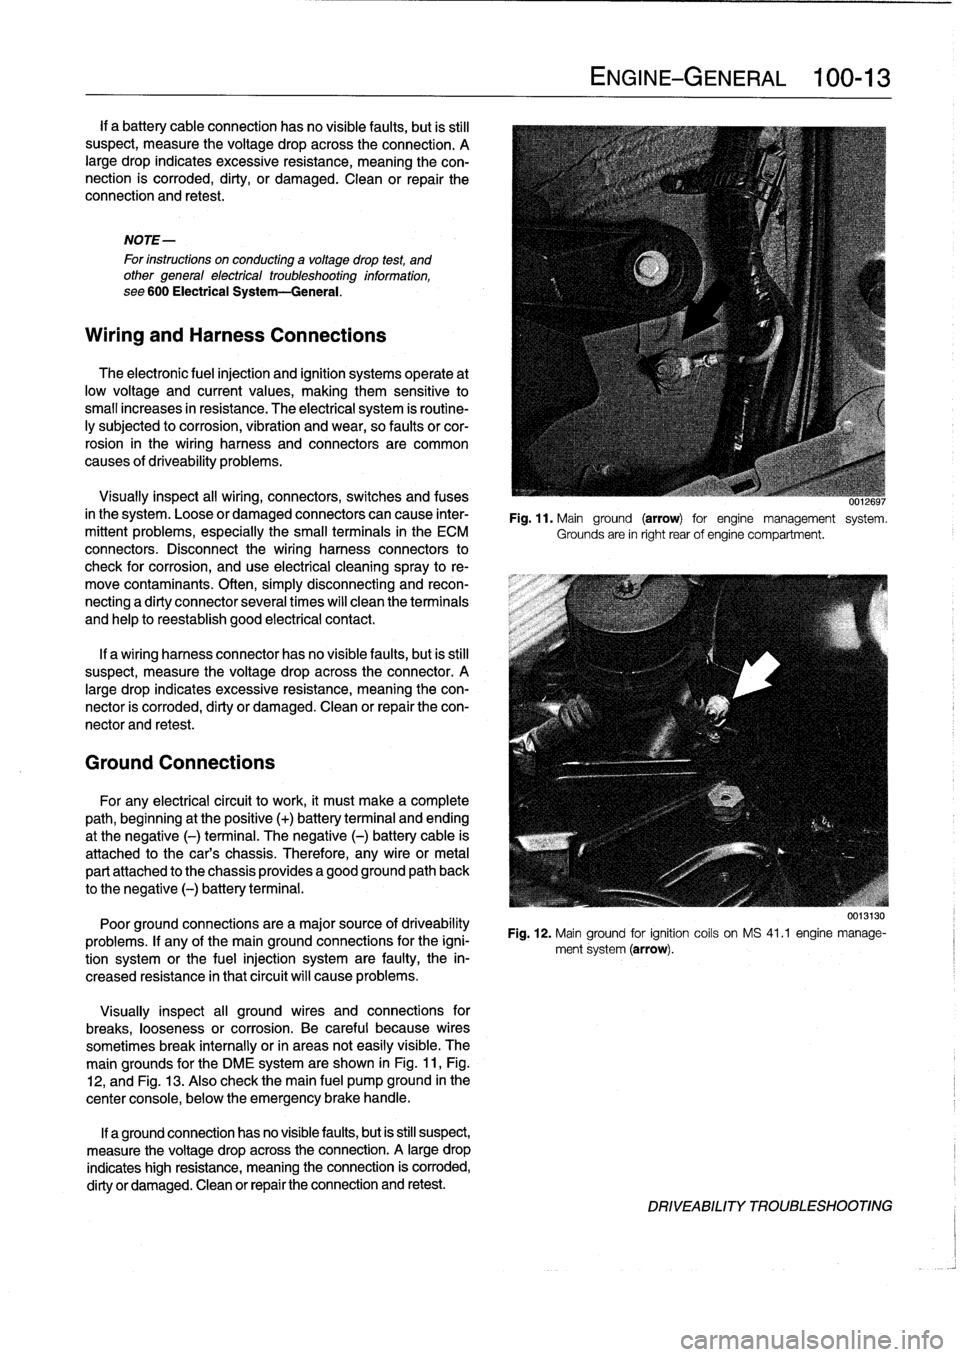 BMW 323i 1993 E36 Workshop Manual 
If
a
battery
cableconnection
hasno
visible
faults,
but
is
still
suspect,
measure
the
voltage
drop
across
the
connection
.
A
large
drop
indicates
excessive
resistance,
meaning
the
con-
nection
is
corr